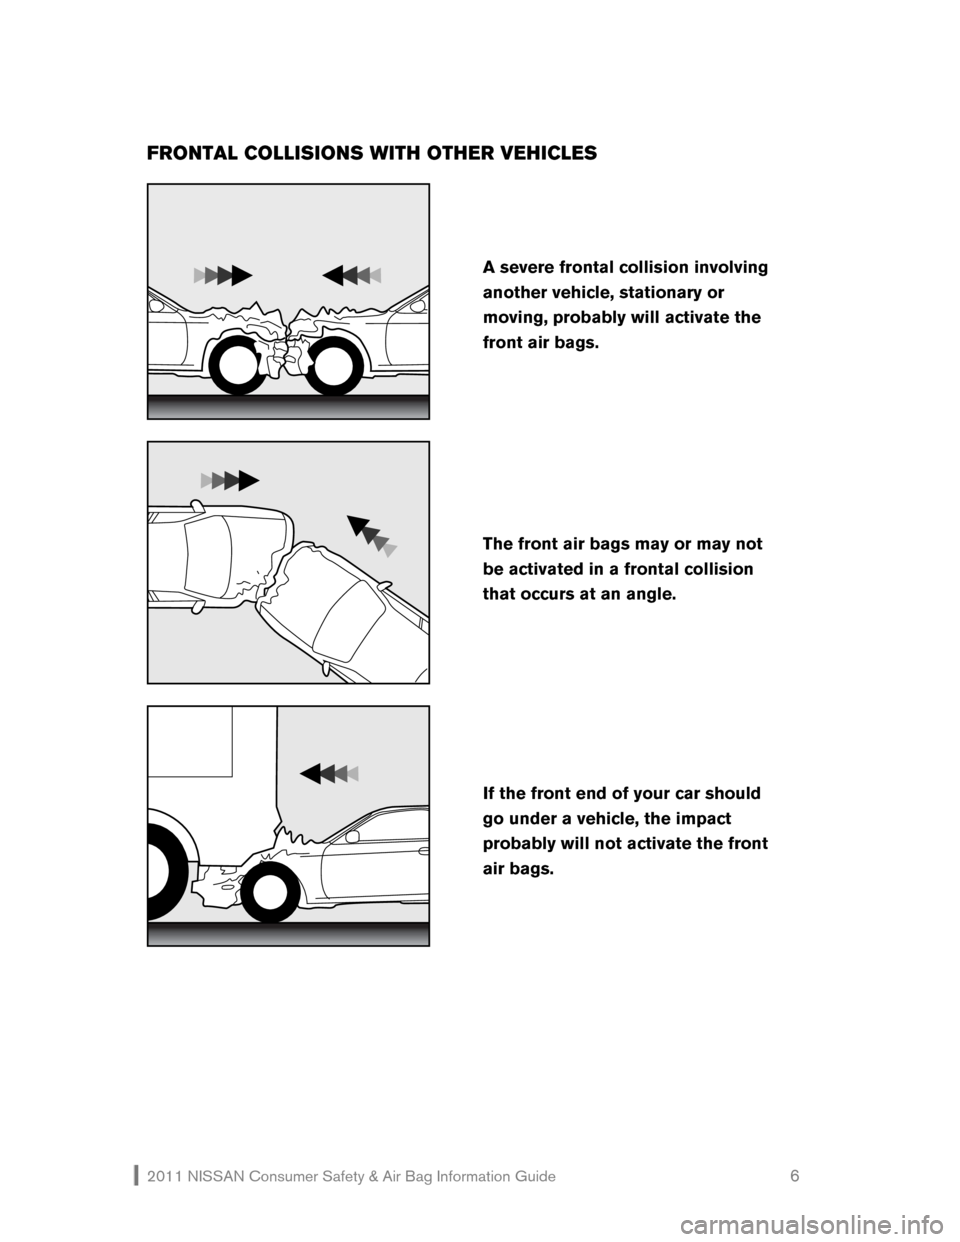 NISSAN XTERRA 2011 N50 / 2.G Consumer Safety Air Bag Information Guide 2011 NISSAN Consumer Safety & Air Bag Information Guide                                                       6 
FRONTAL COLLISIONS WITH OTHER VEHICLES 
 
 
 
 
If the front end of your car should 
go